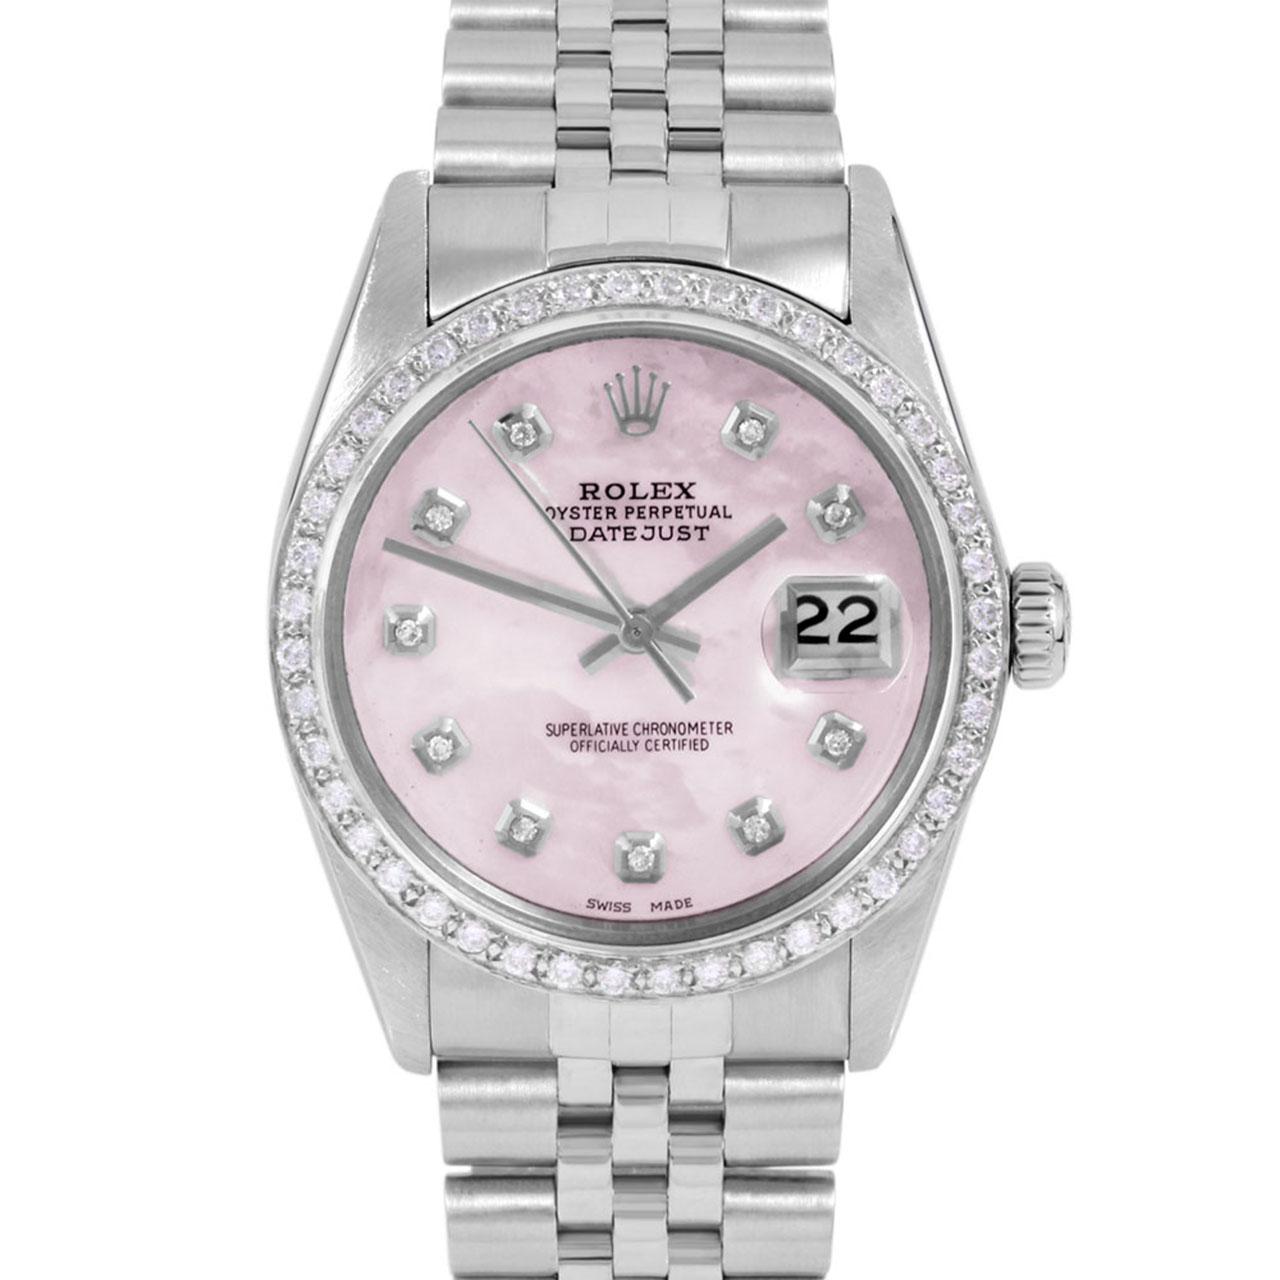 Swiss Wrist - SKU 16014-PMOP-DIA-AM-BDS-JBL

Brand : Rolex
Model : Datejust Ref# 16014 - Plastic Quickset Model 
Gender : Mens
Metals :  Stainless Steel
Case Size : 36 mm
Dial : Custom Pink Mother Of Pearl Diamond Dial (This dial is not original